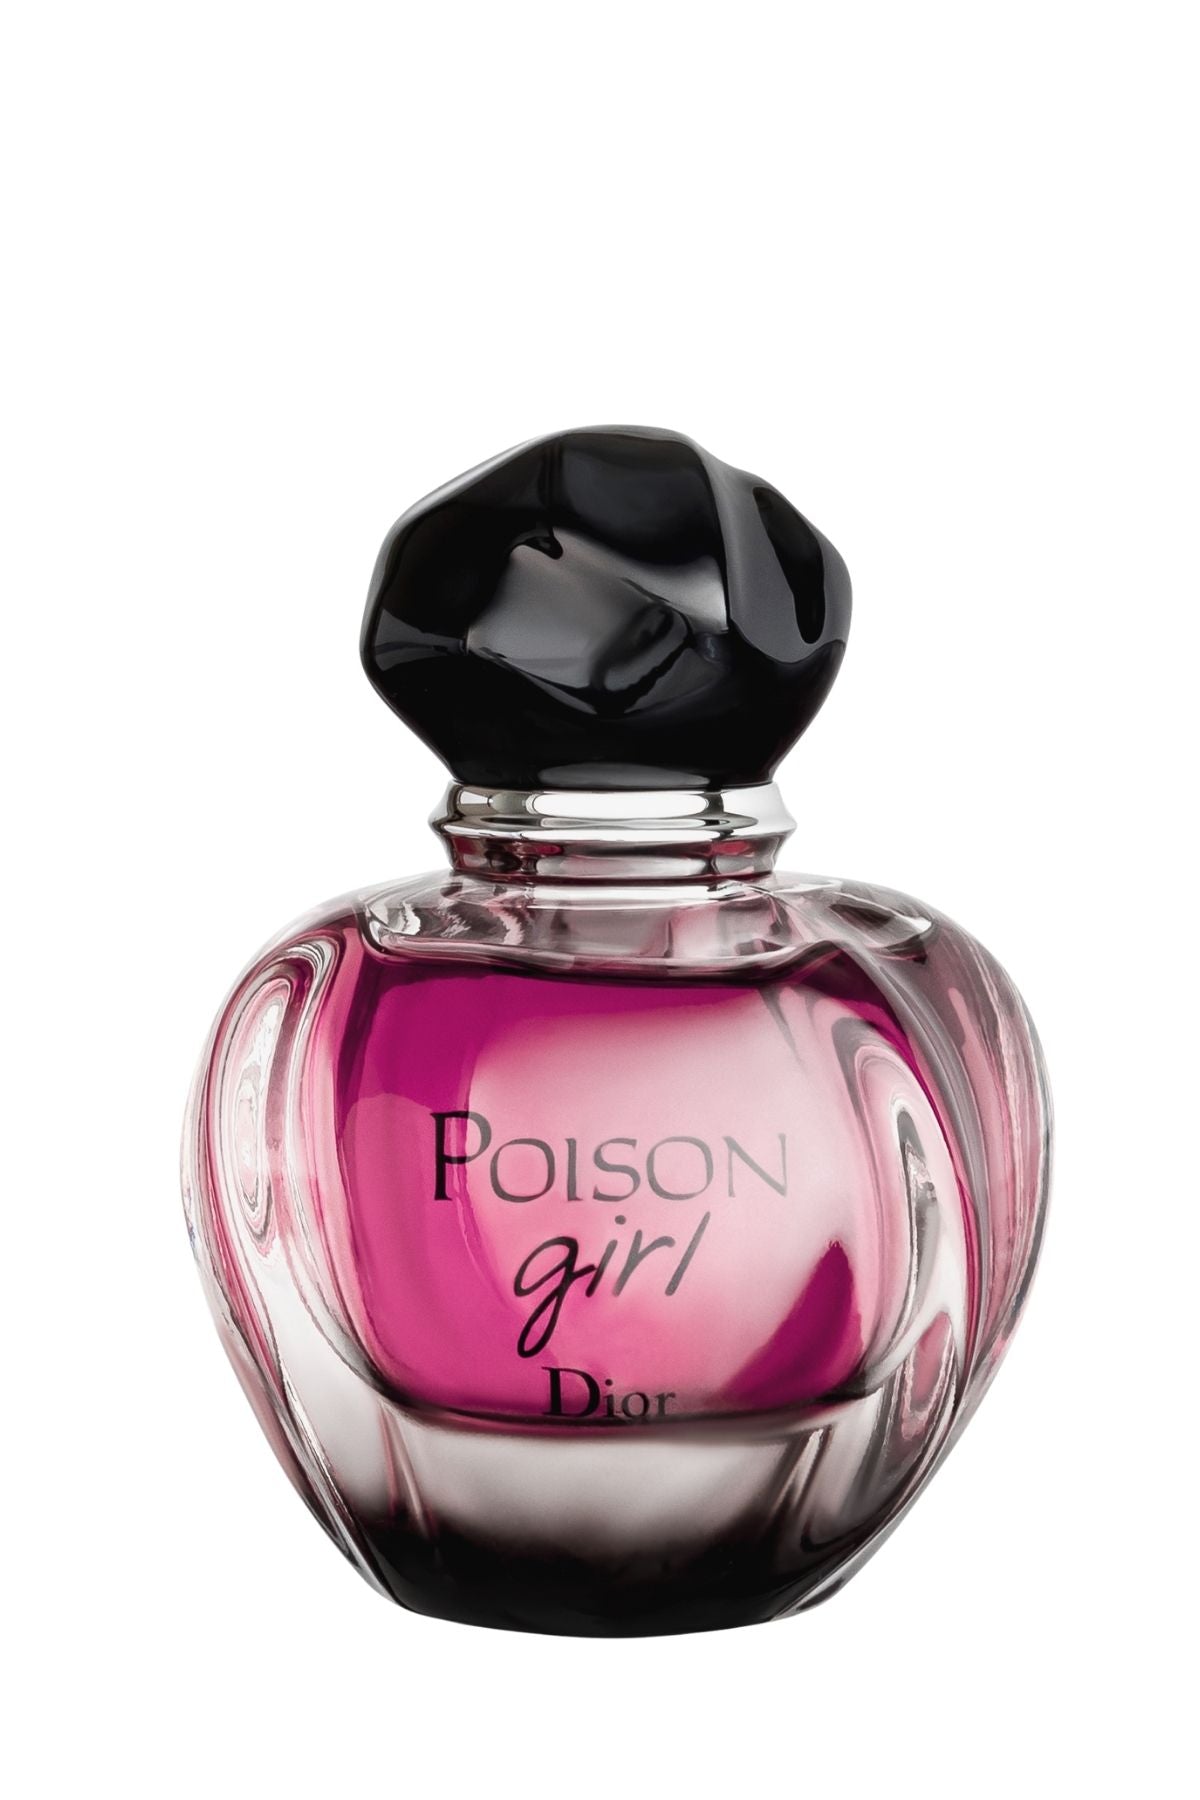 Christian Dior POISON GIRL Perfume Review  High dosed Sweet fragrance   YouTube